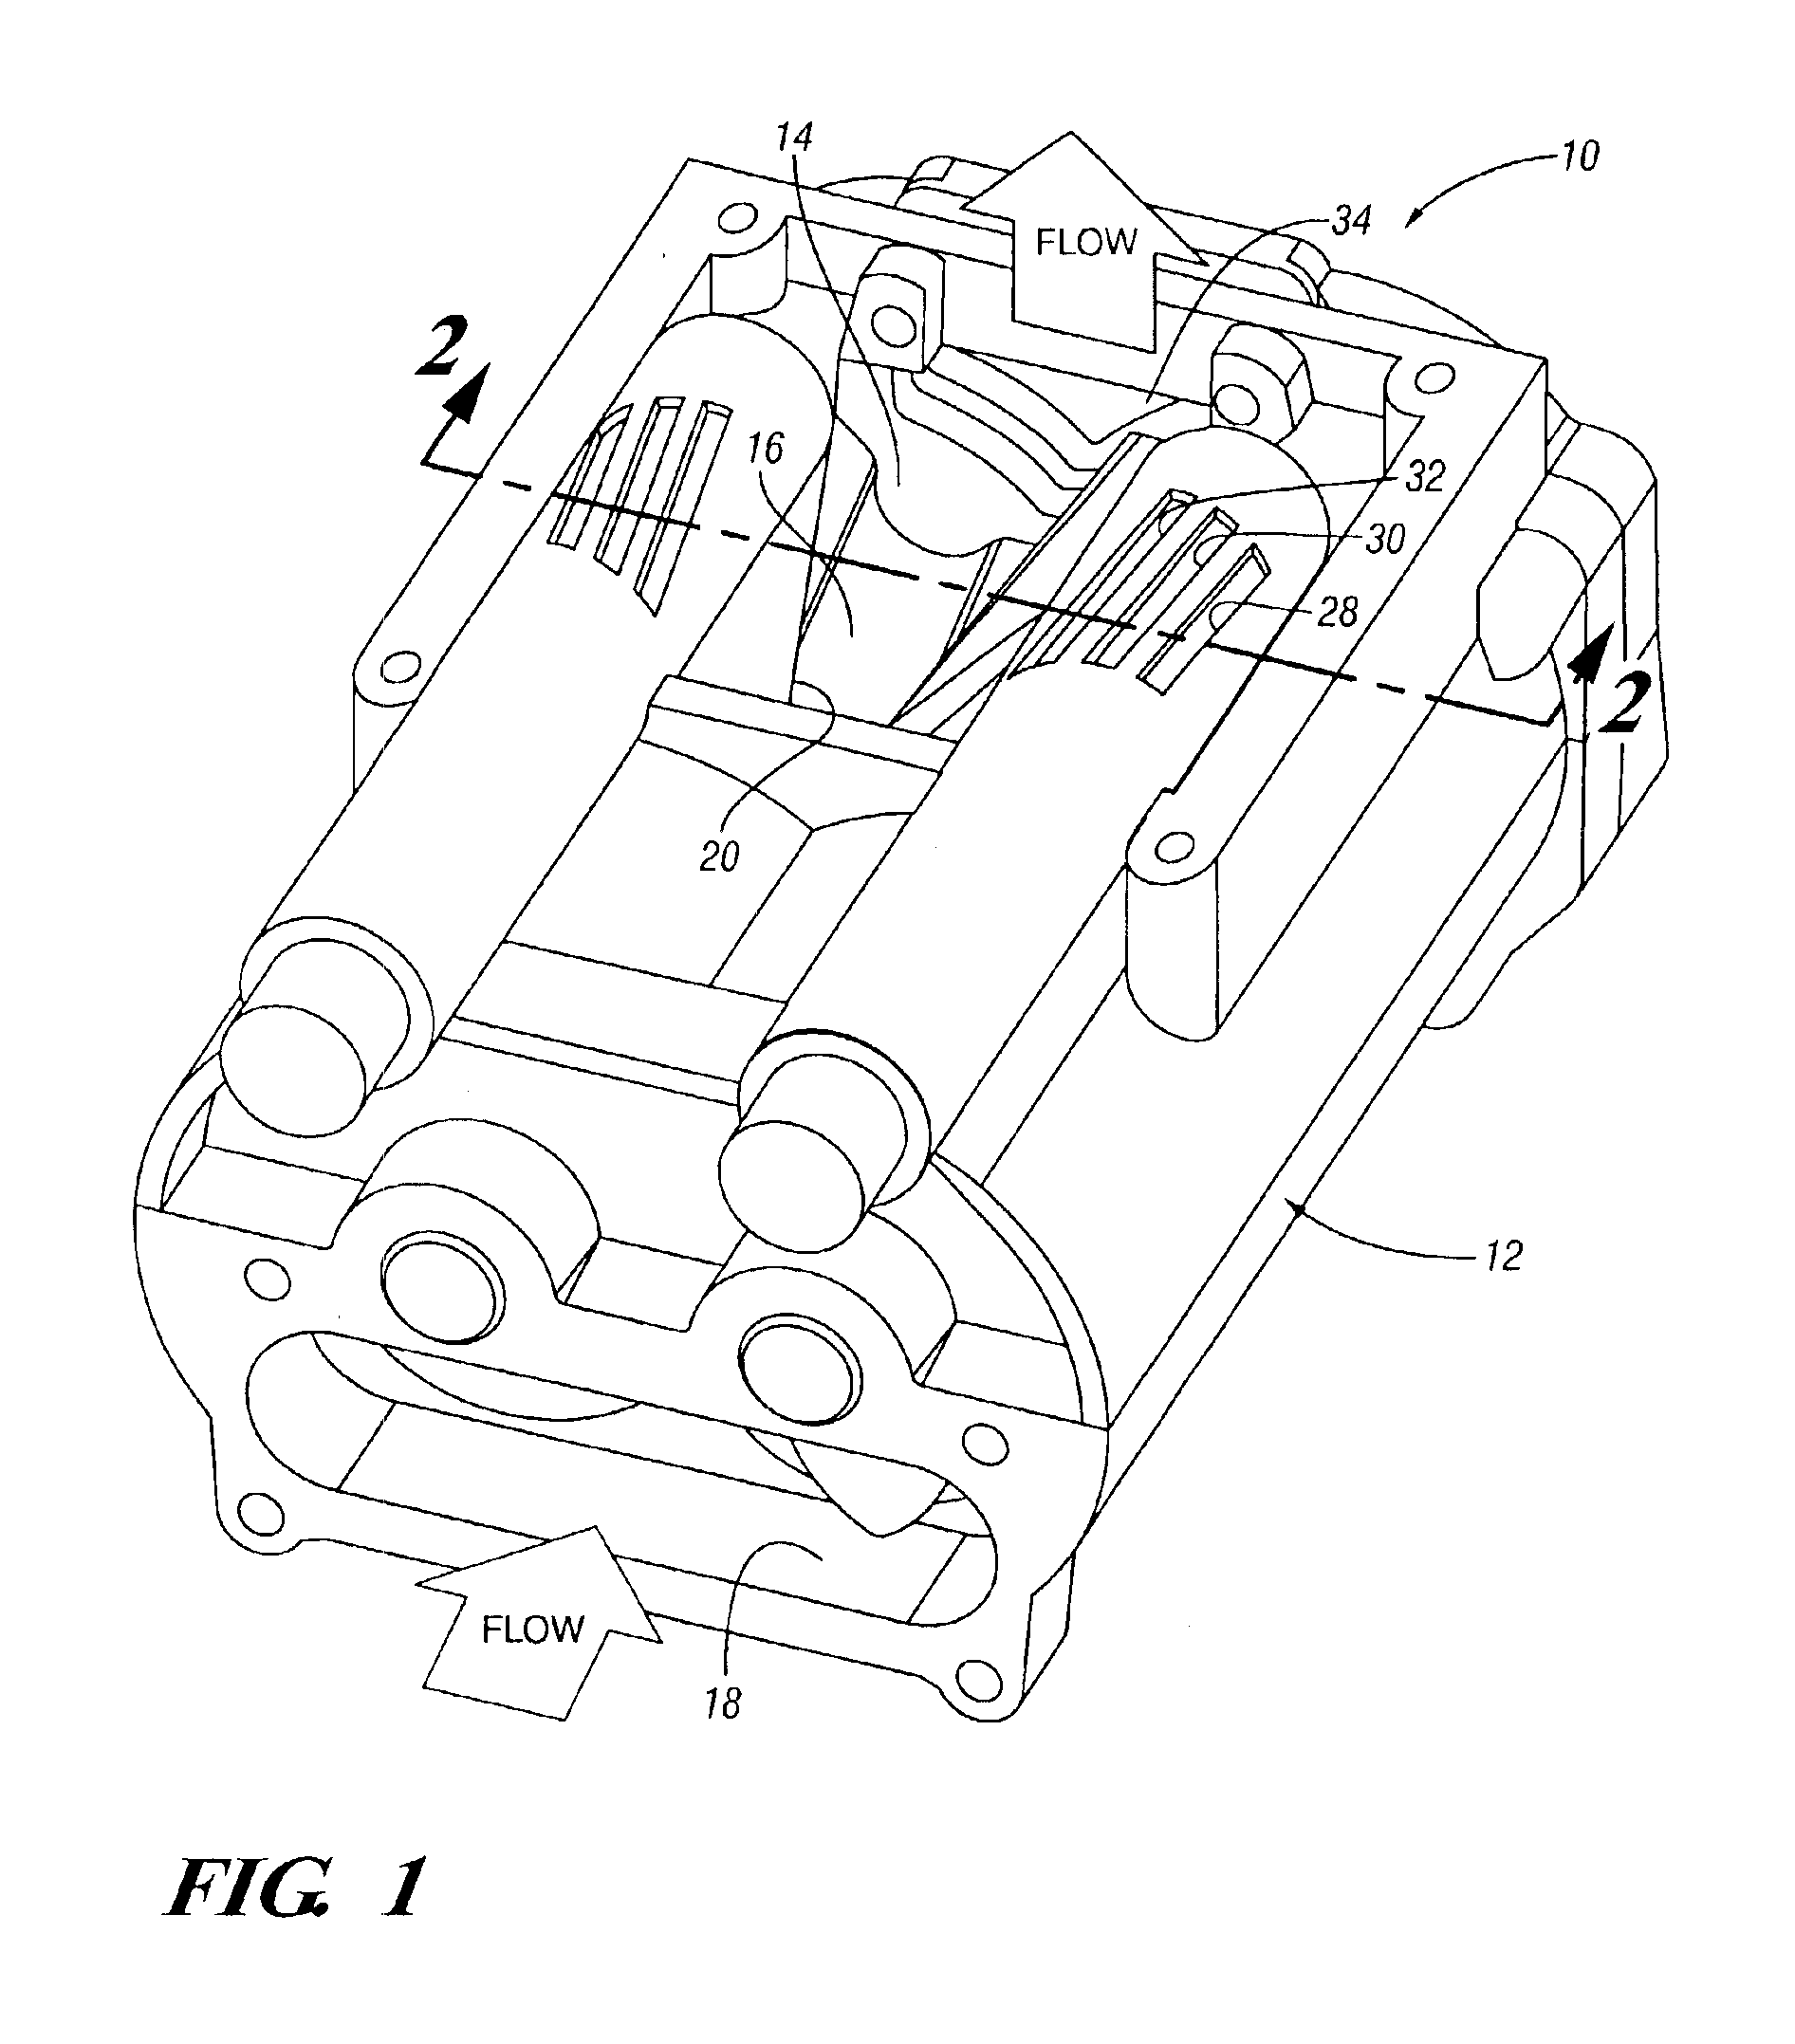 Supercharger with multiple backflow ports for noise control